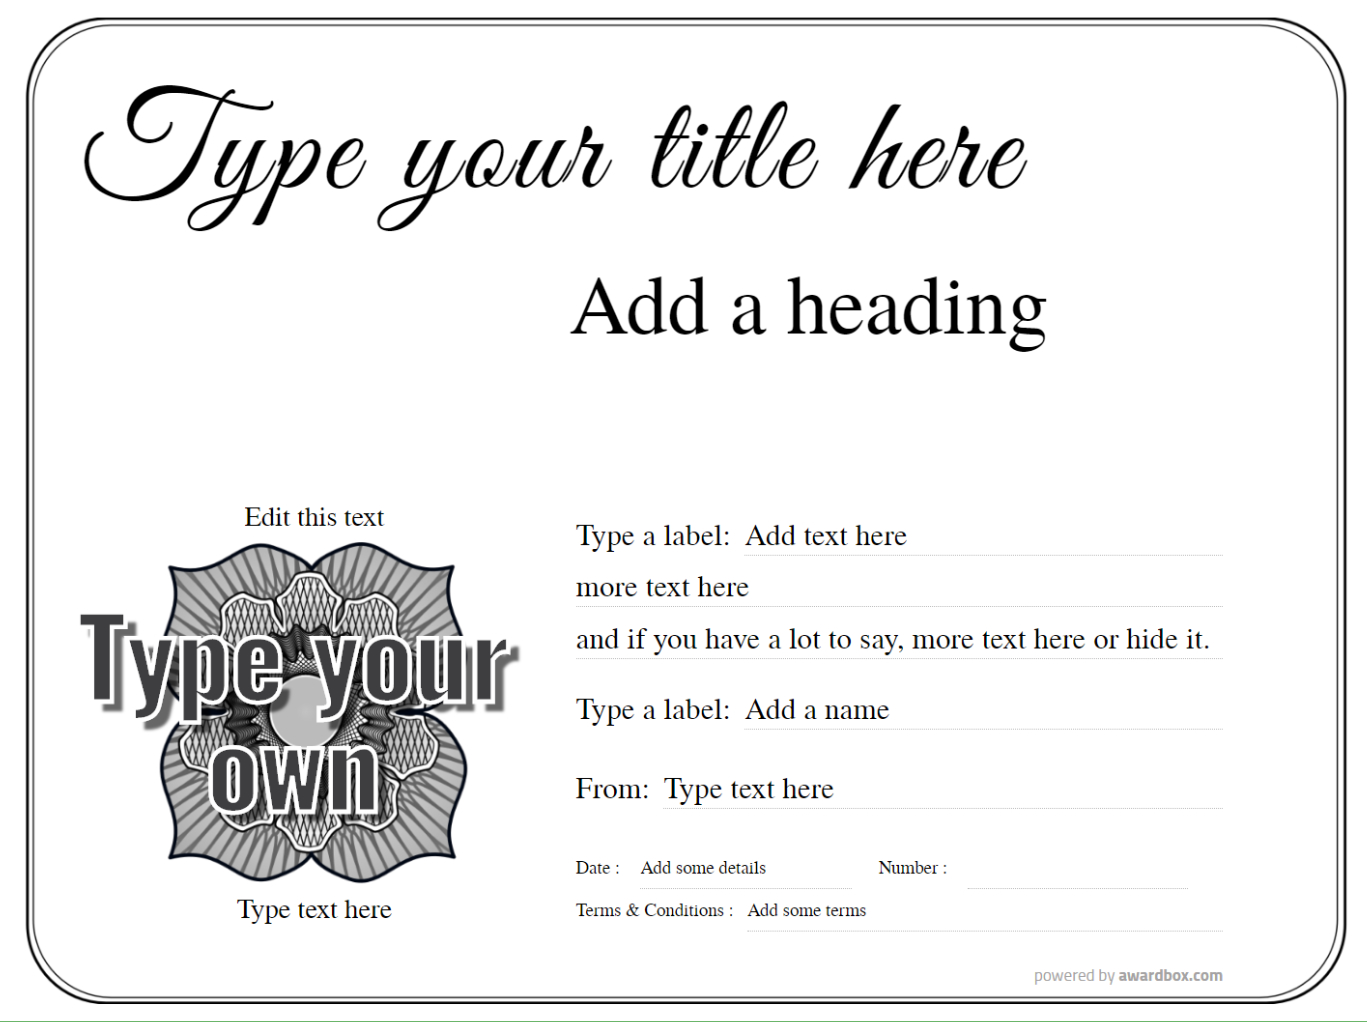 Free Gift Certificate templates and ideas - fully editable With Regard To Printable Gift Certificates Templates Free